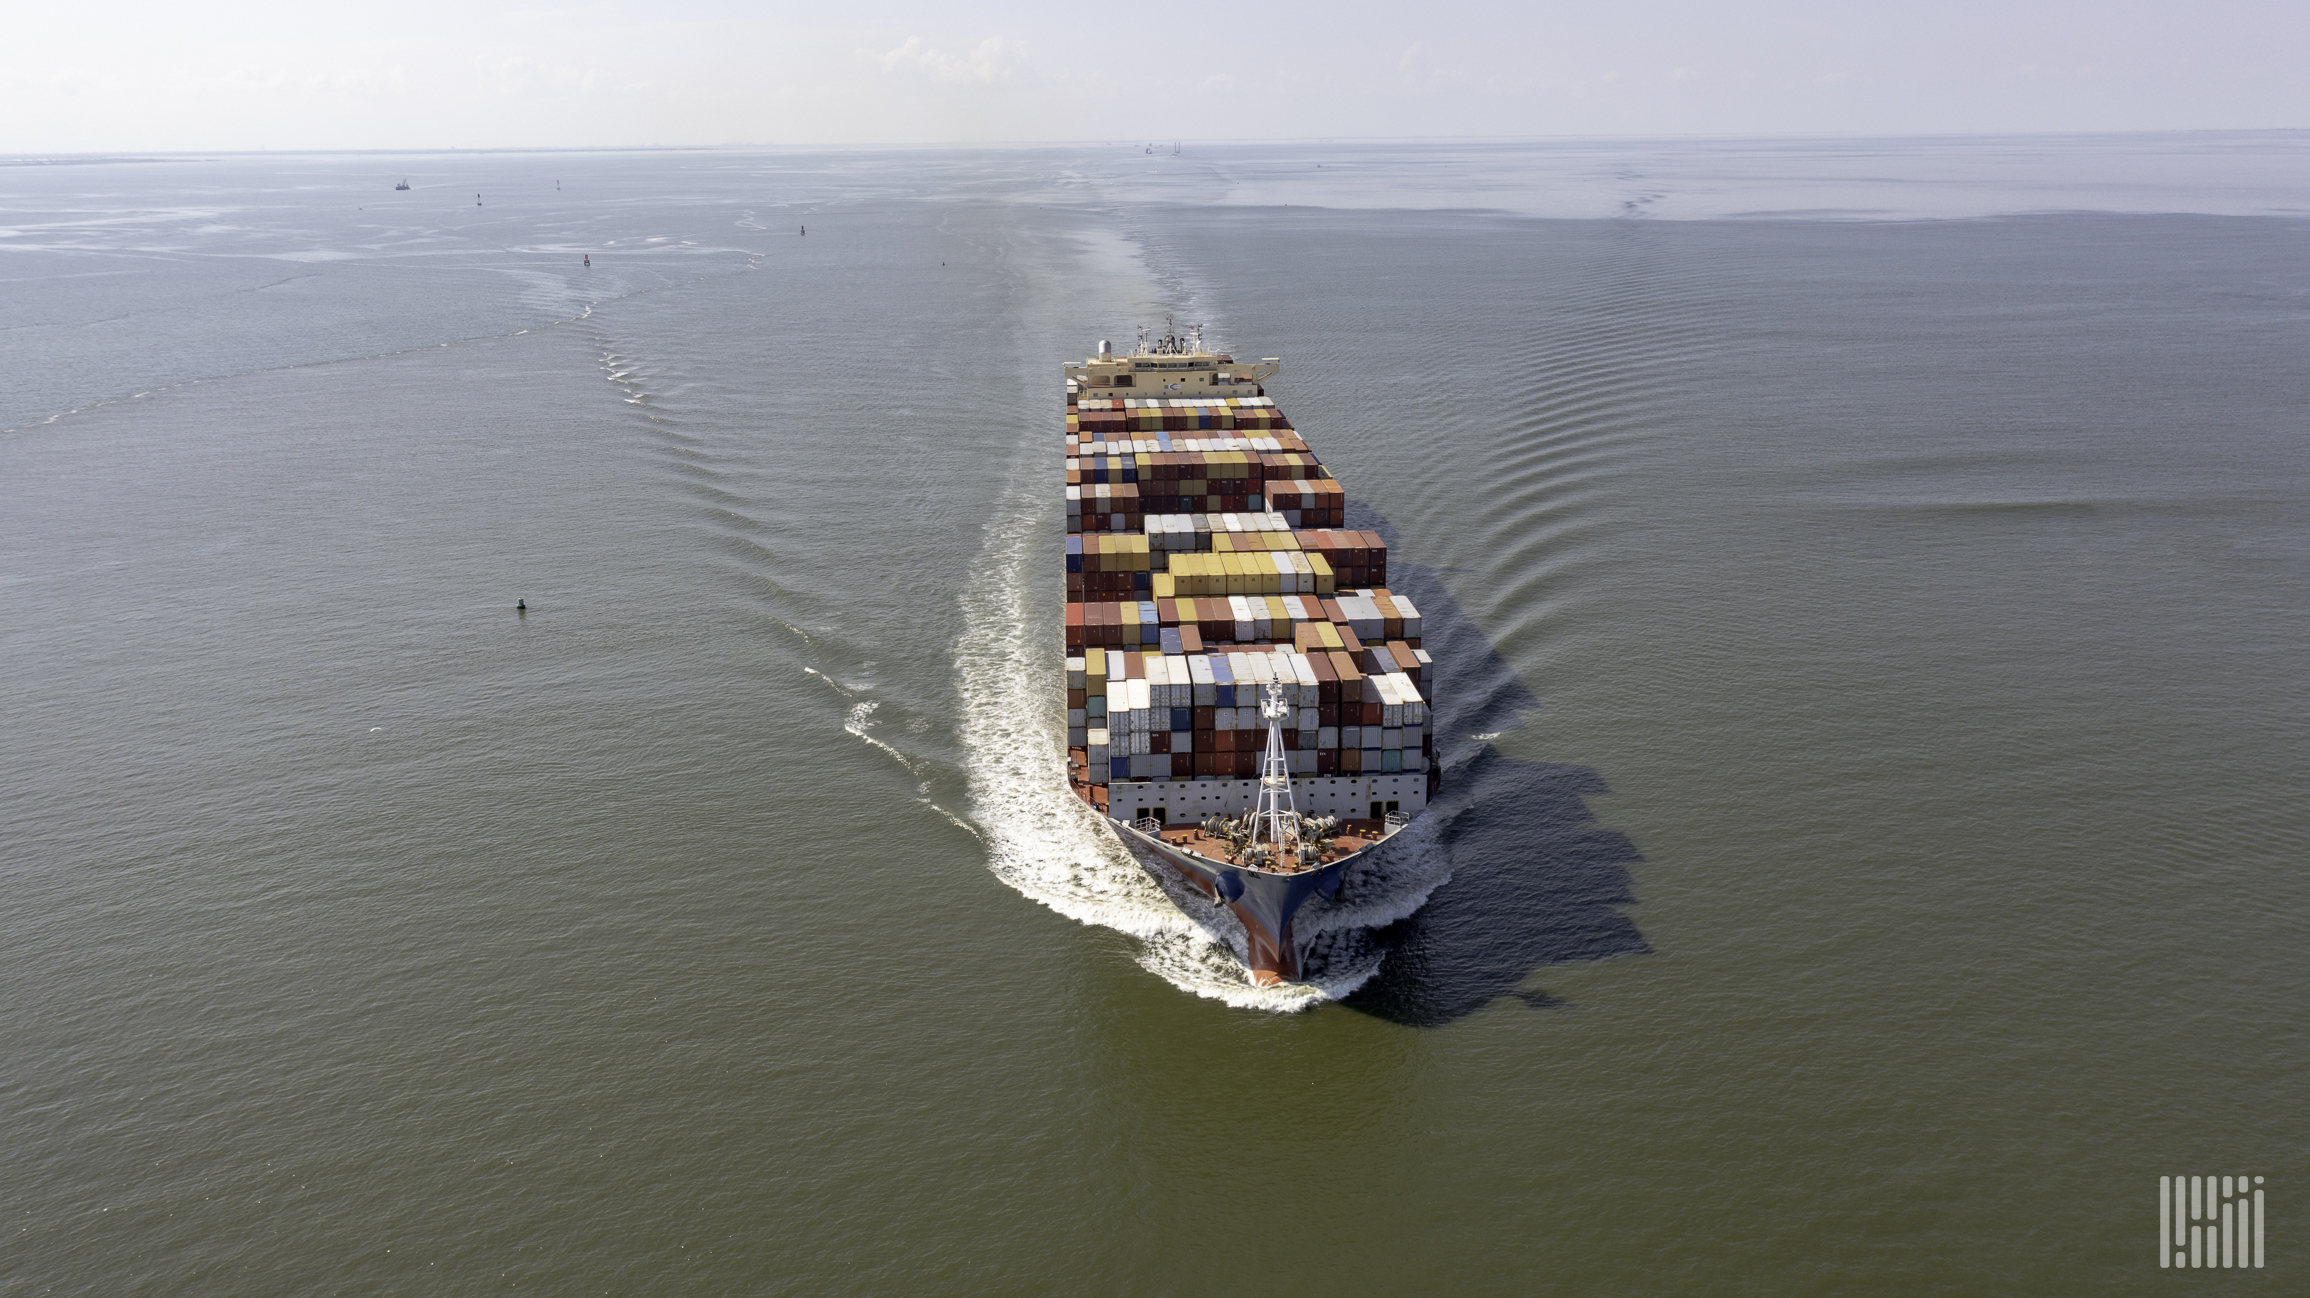 An aerial view of a large container ship on the water